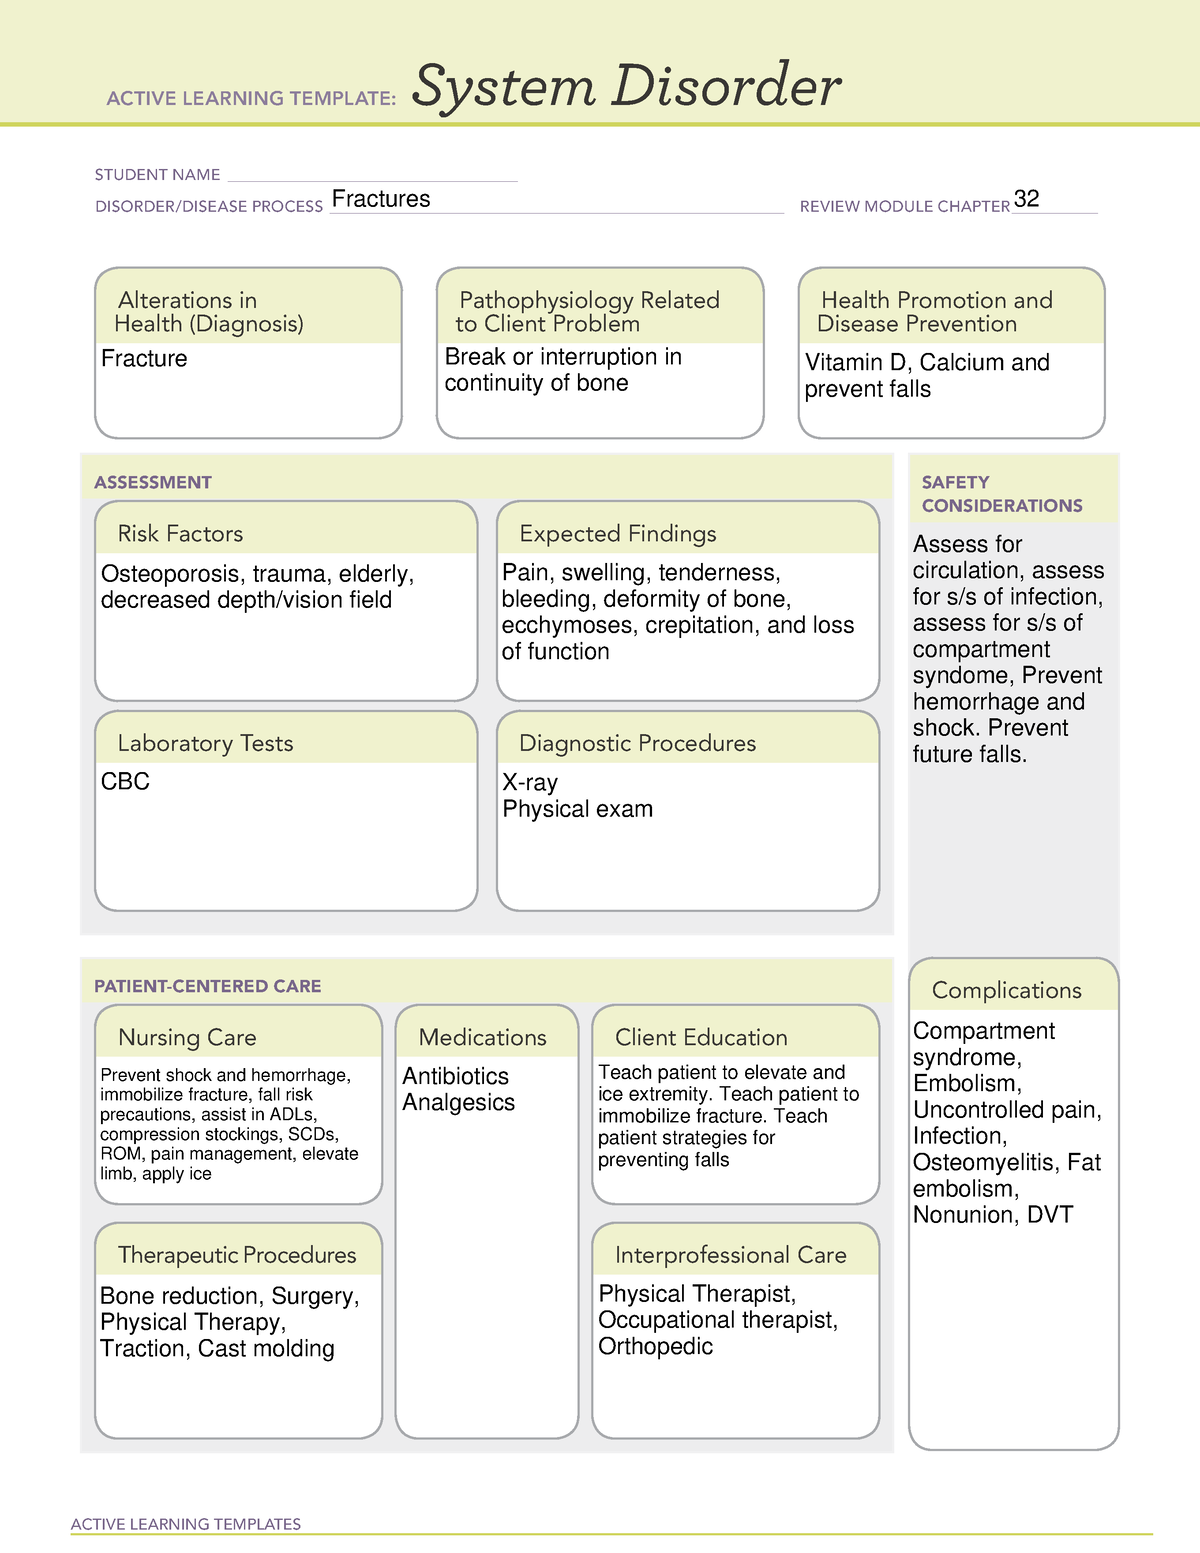 ATI Fracture system disorder form - ACTIVE LEARNING TEMPLATES System ...